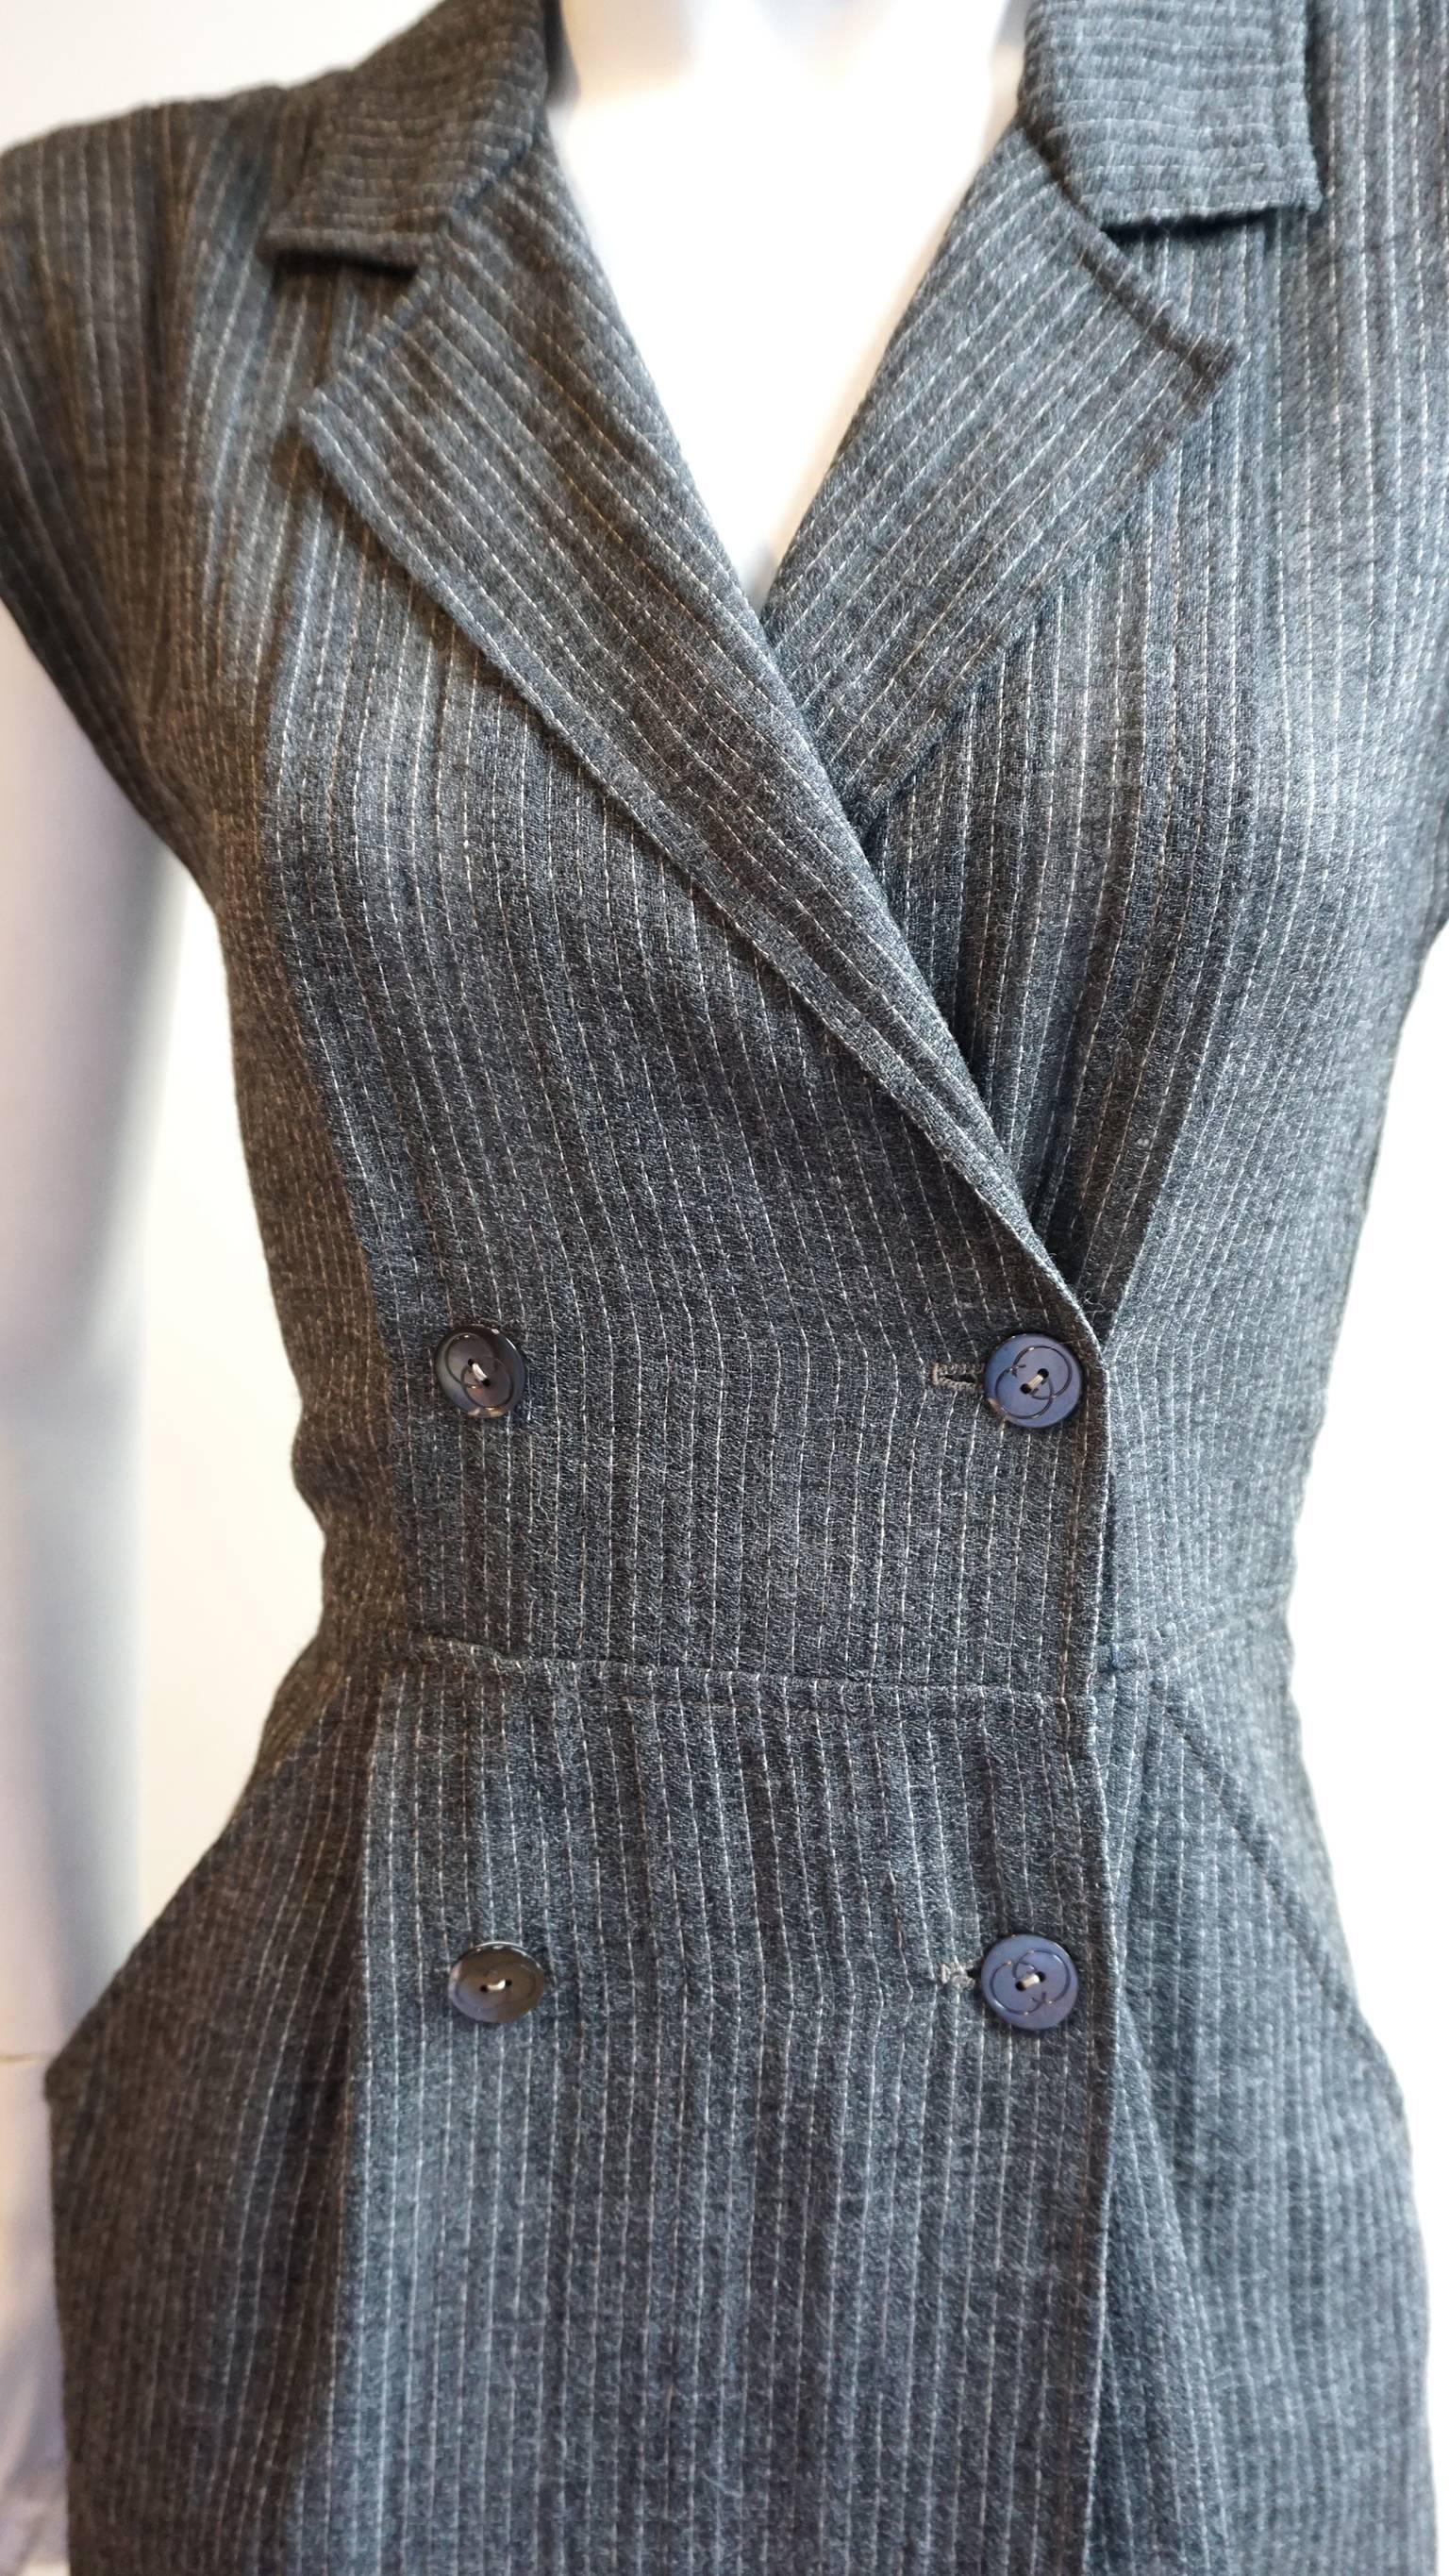 This GUCCI dress is made of high quality linen featuring a white on grey pinstripe. The sleeveless dress is accented with large lapels. The front is secured closed with the double breasted button closure. Hip pockets accentuate the waist. Unlined.